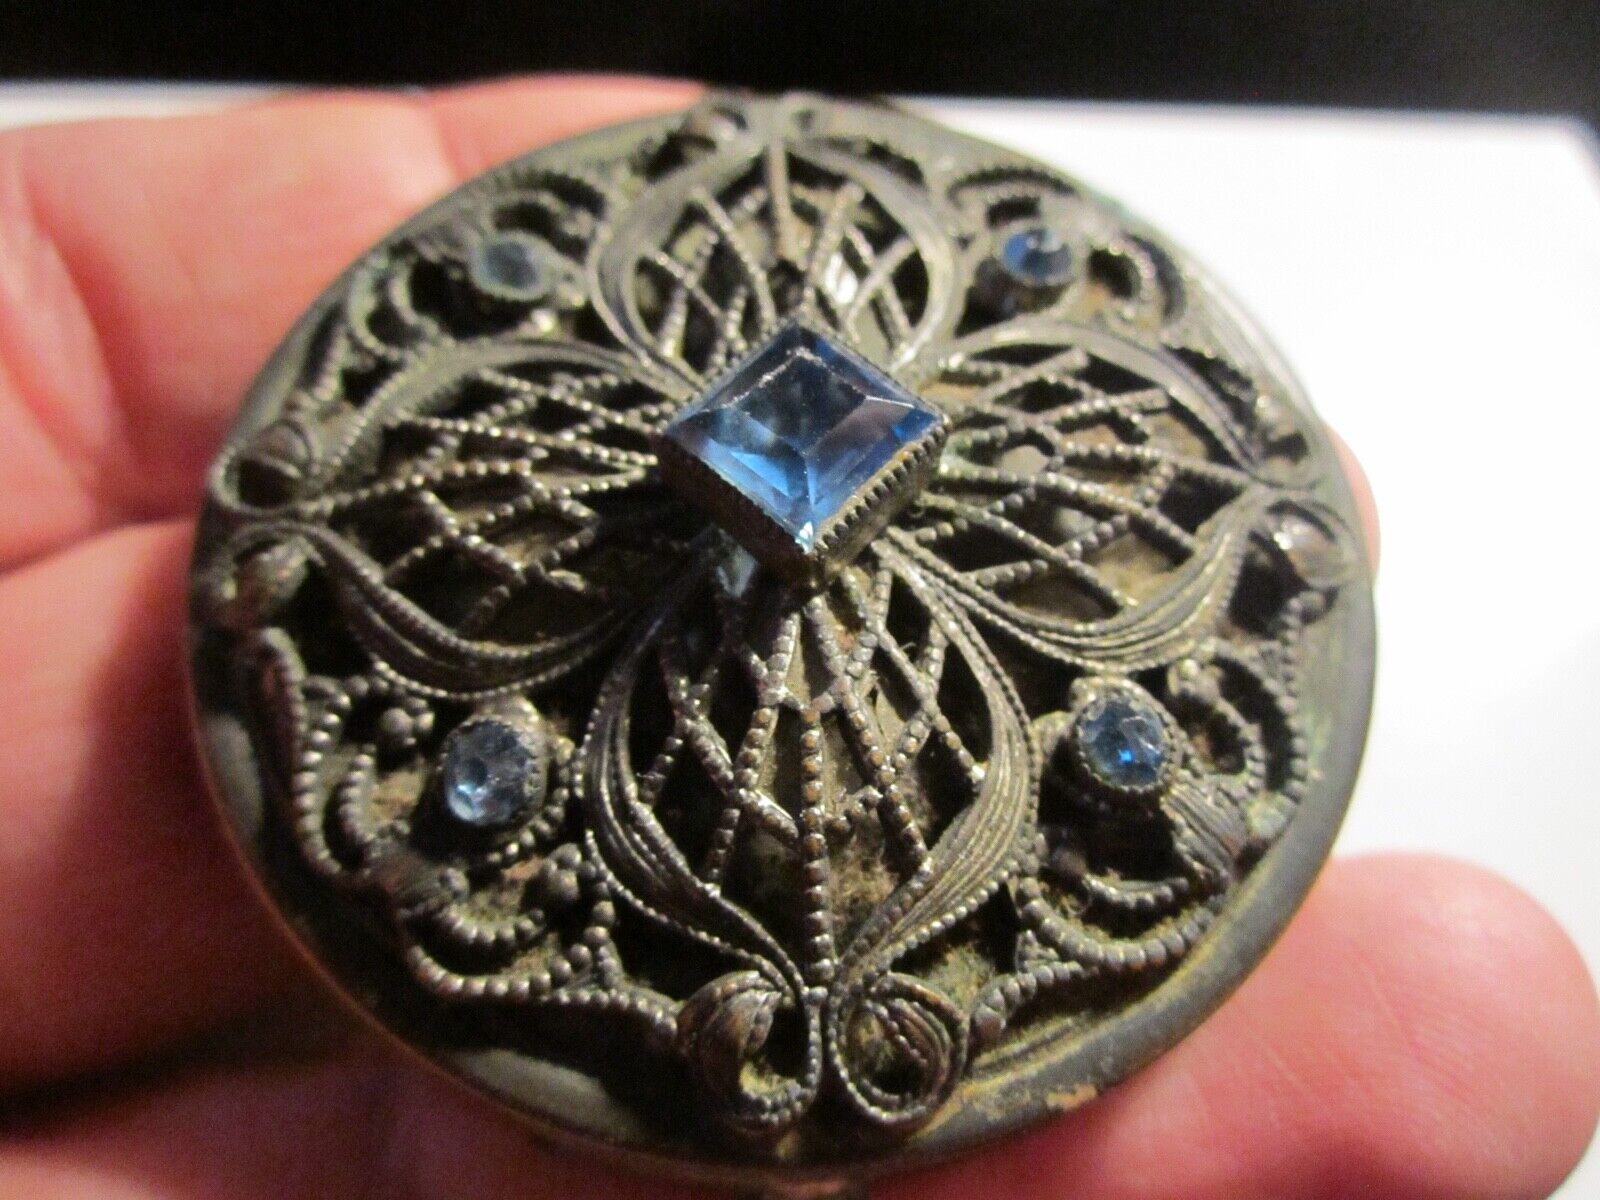 ANTIQUE COMPACT WITH MIRROR - VERY INTRICATE DETAIL - BBA34